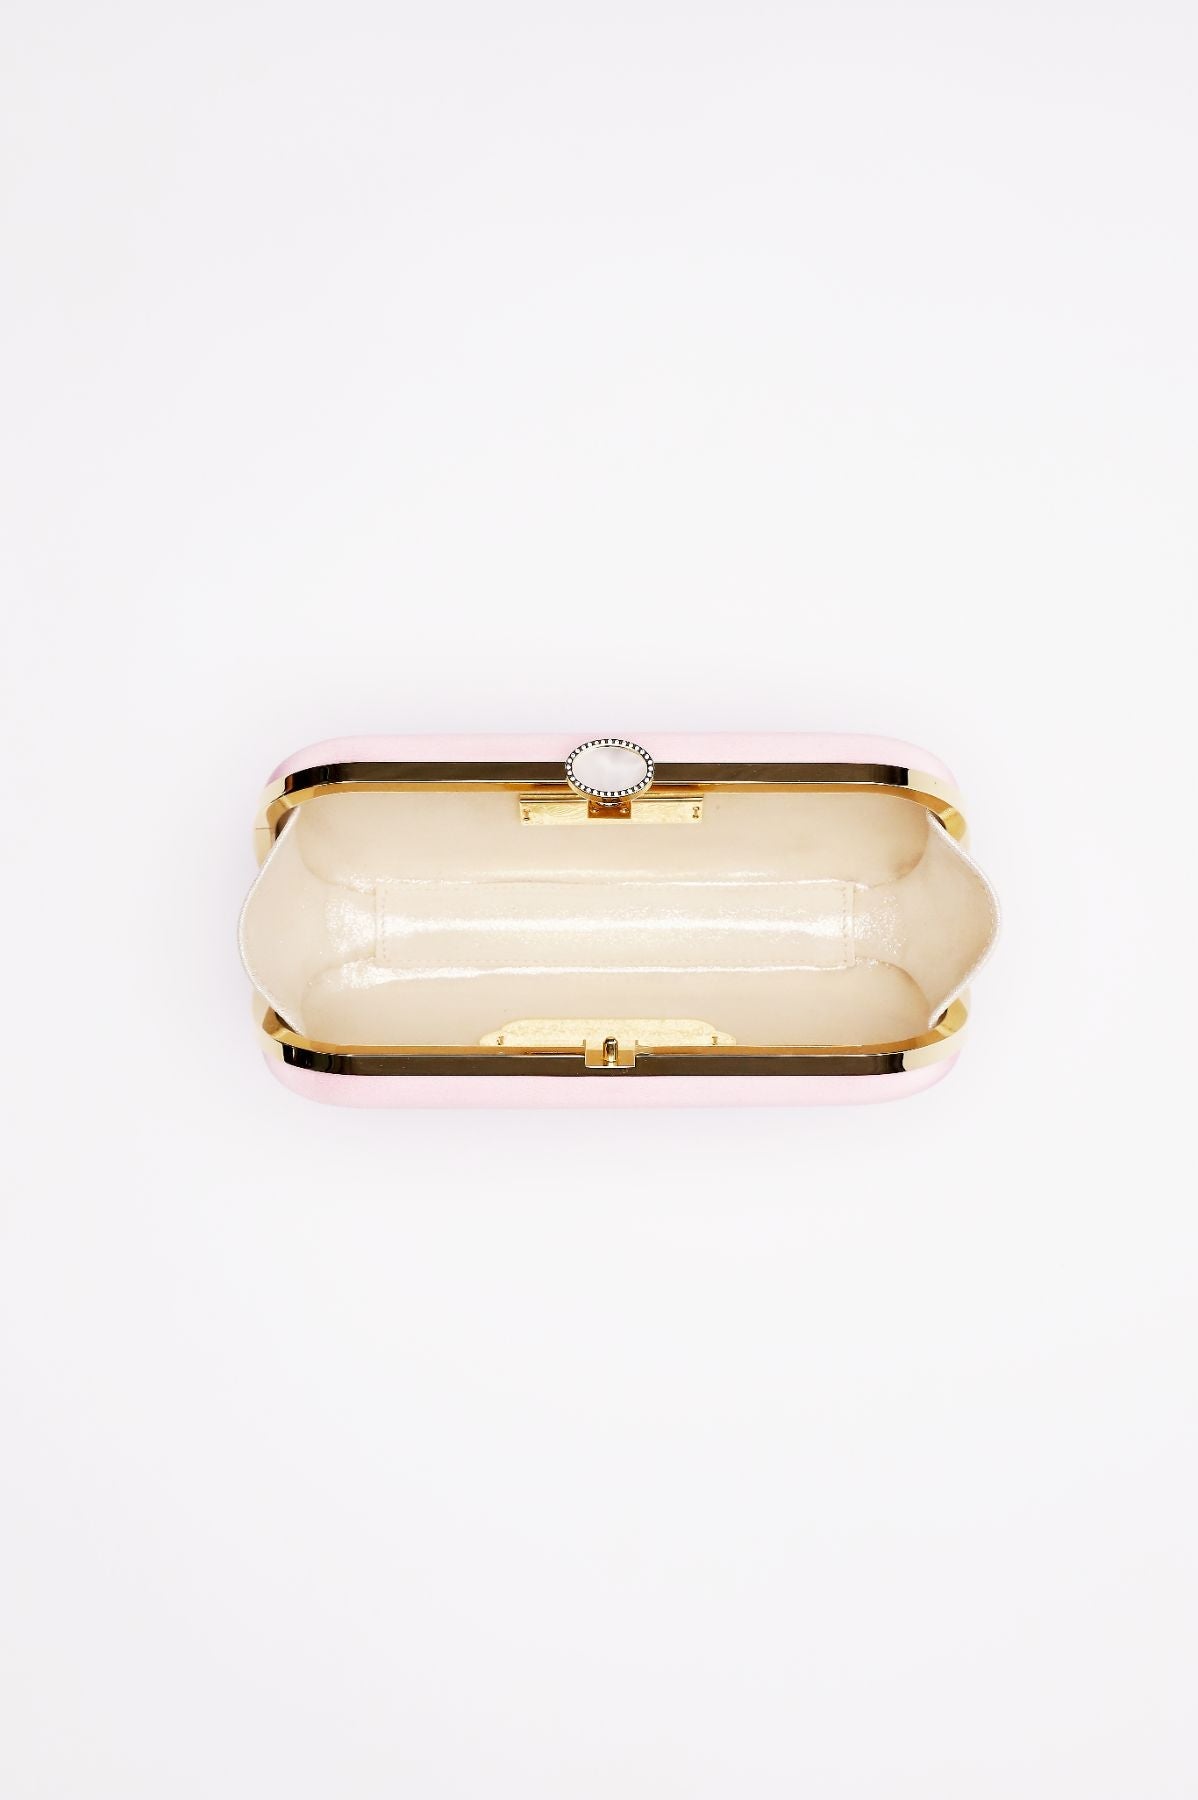 Bella Rosa Collection's Bella Clutch Pink Petite with gold-tone hardware against a white background.